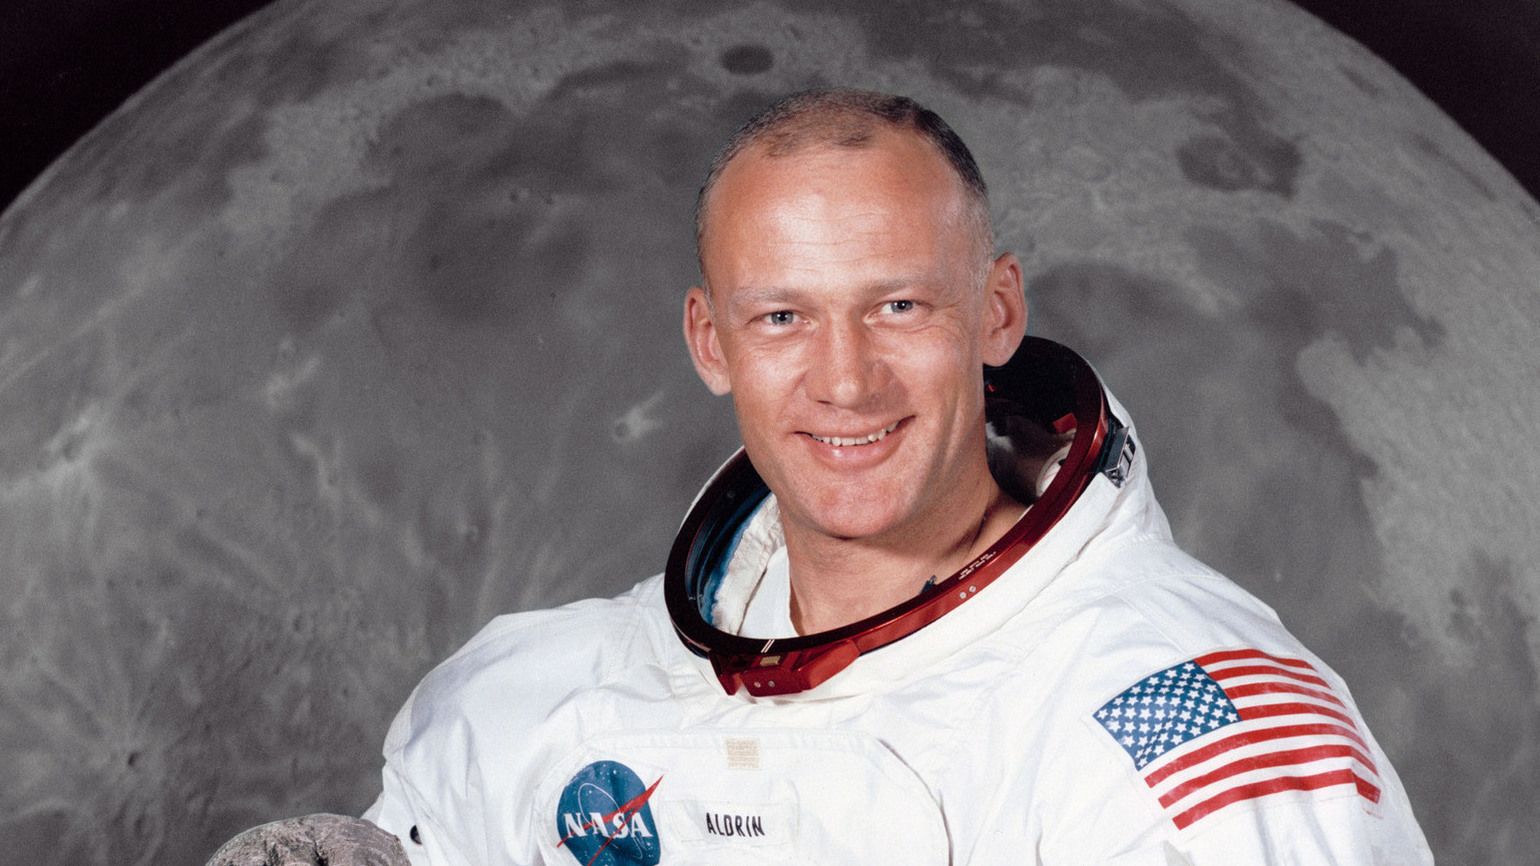 Buzz Aldrin portrait photo with inspirational quotes from NASA Astronauts